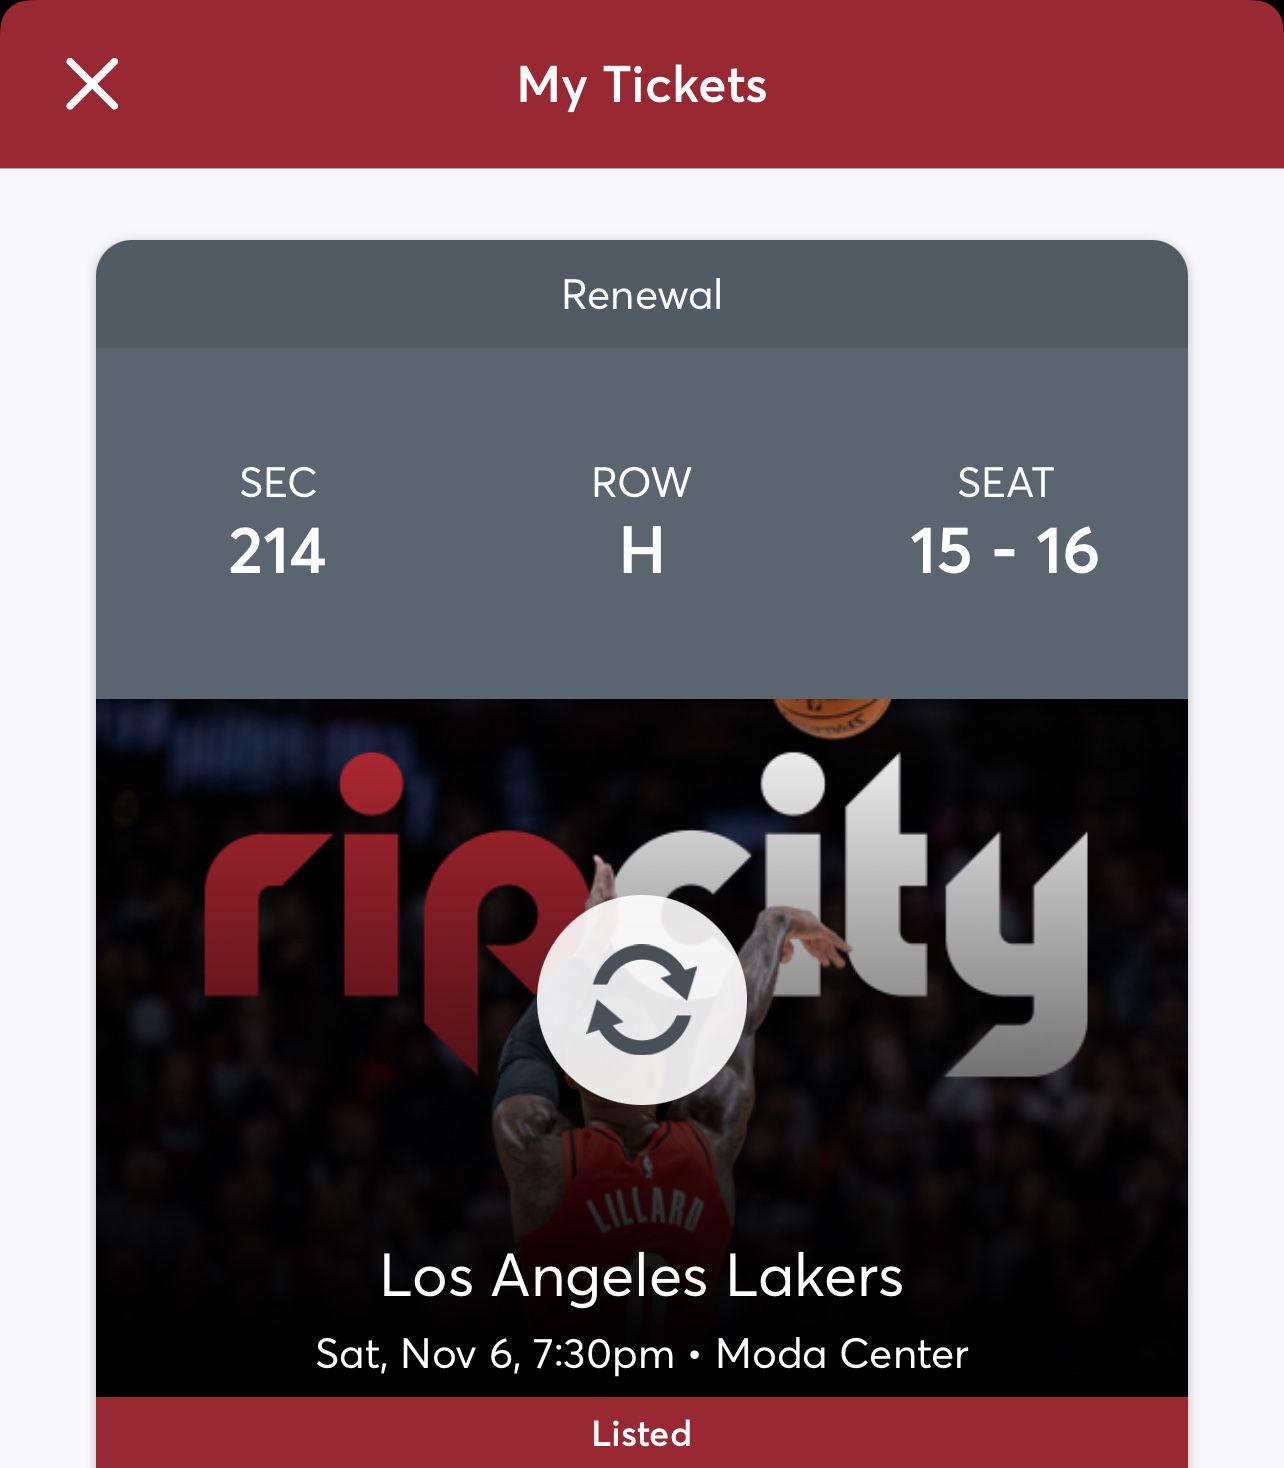 2 Tickets In Club Level, Blazers Vs LAKERS, Saturday 11/06 @ 7:30 PM, with $60 in credit